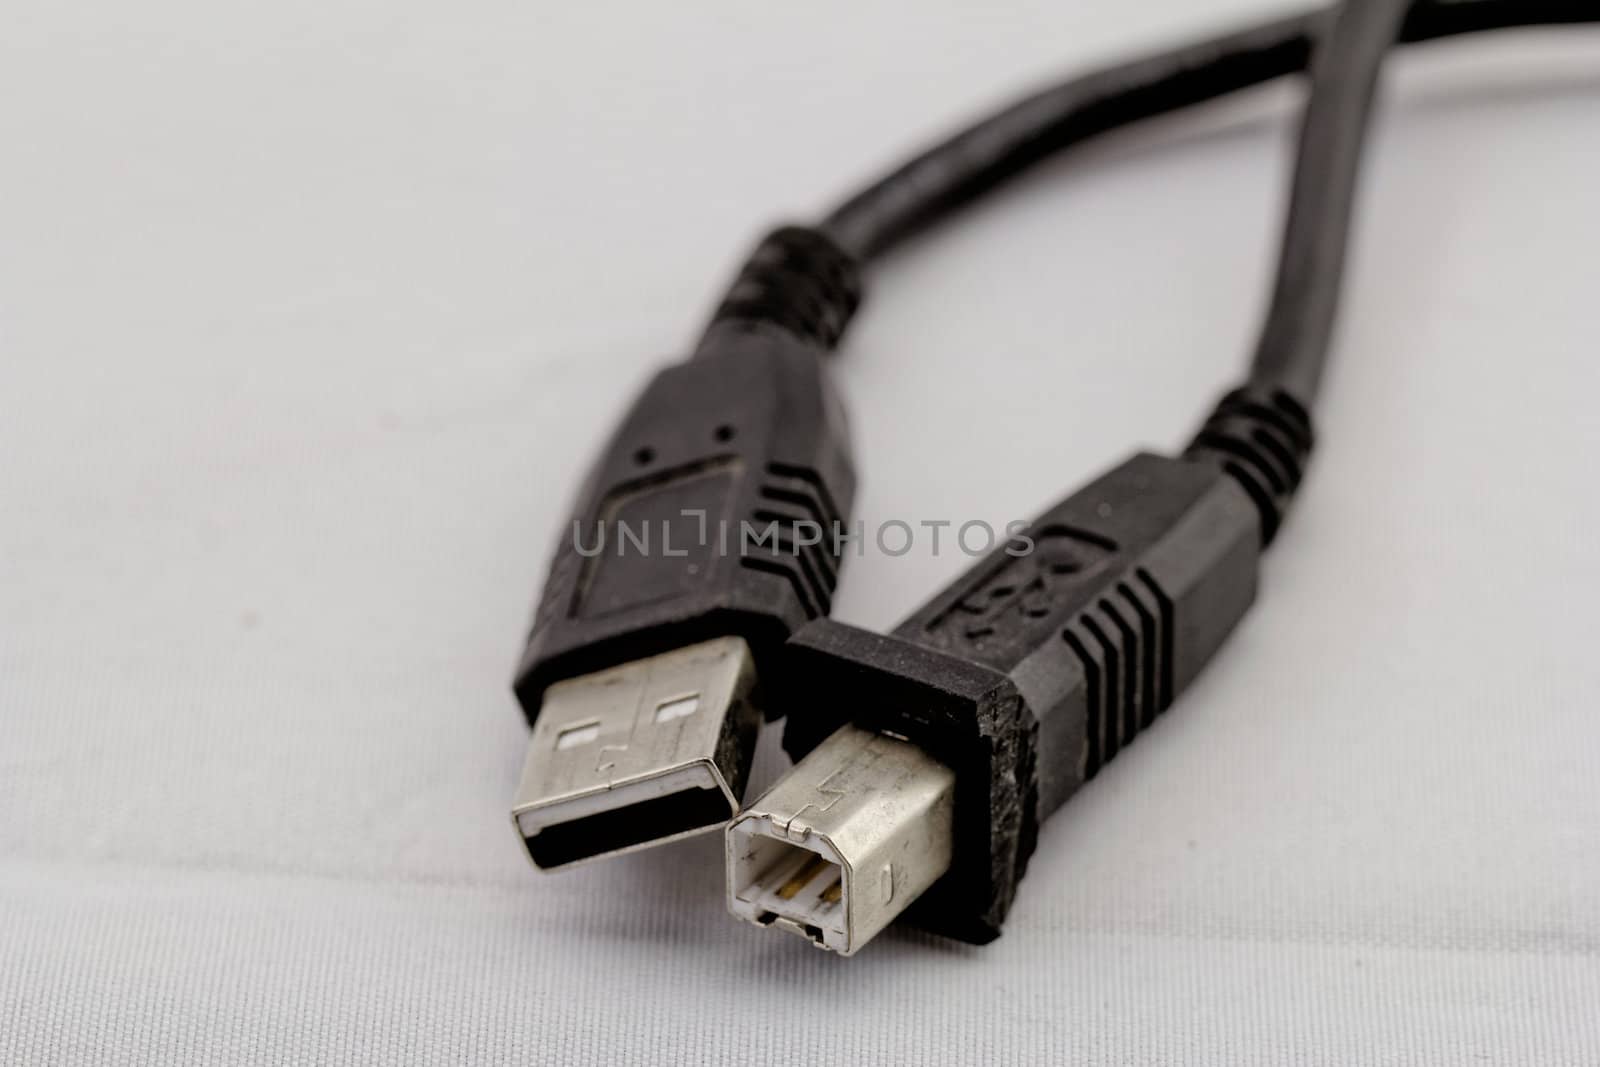 usb extrension cable by NagyDodo